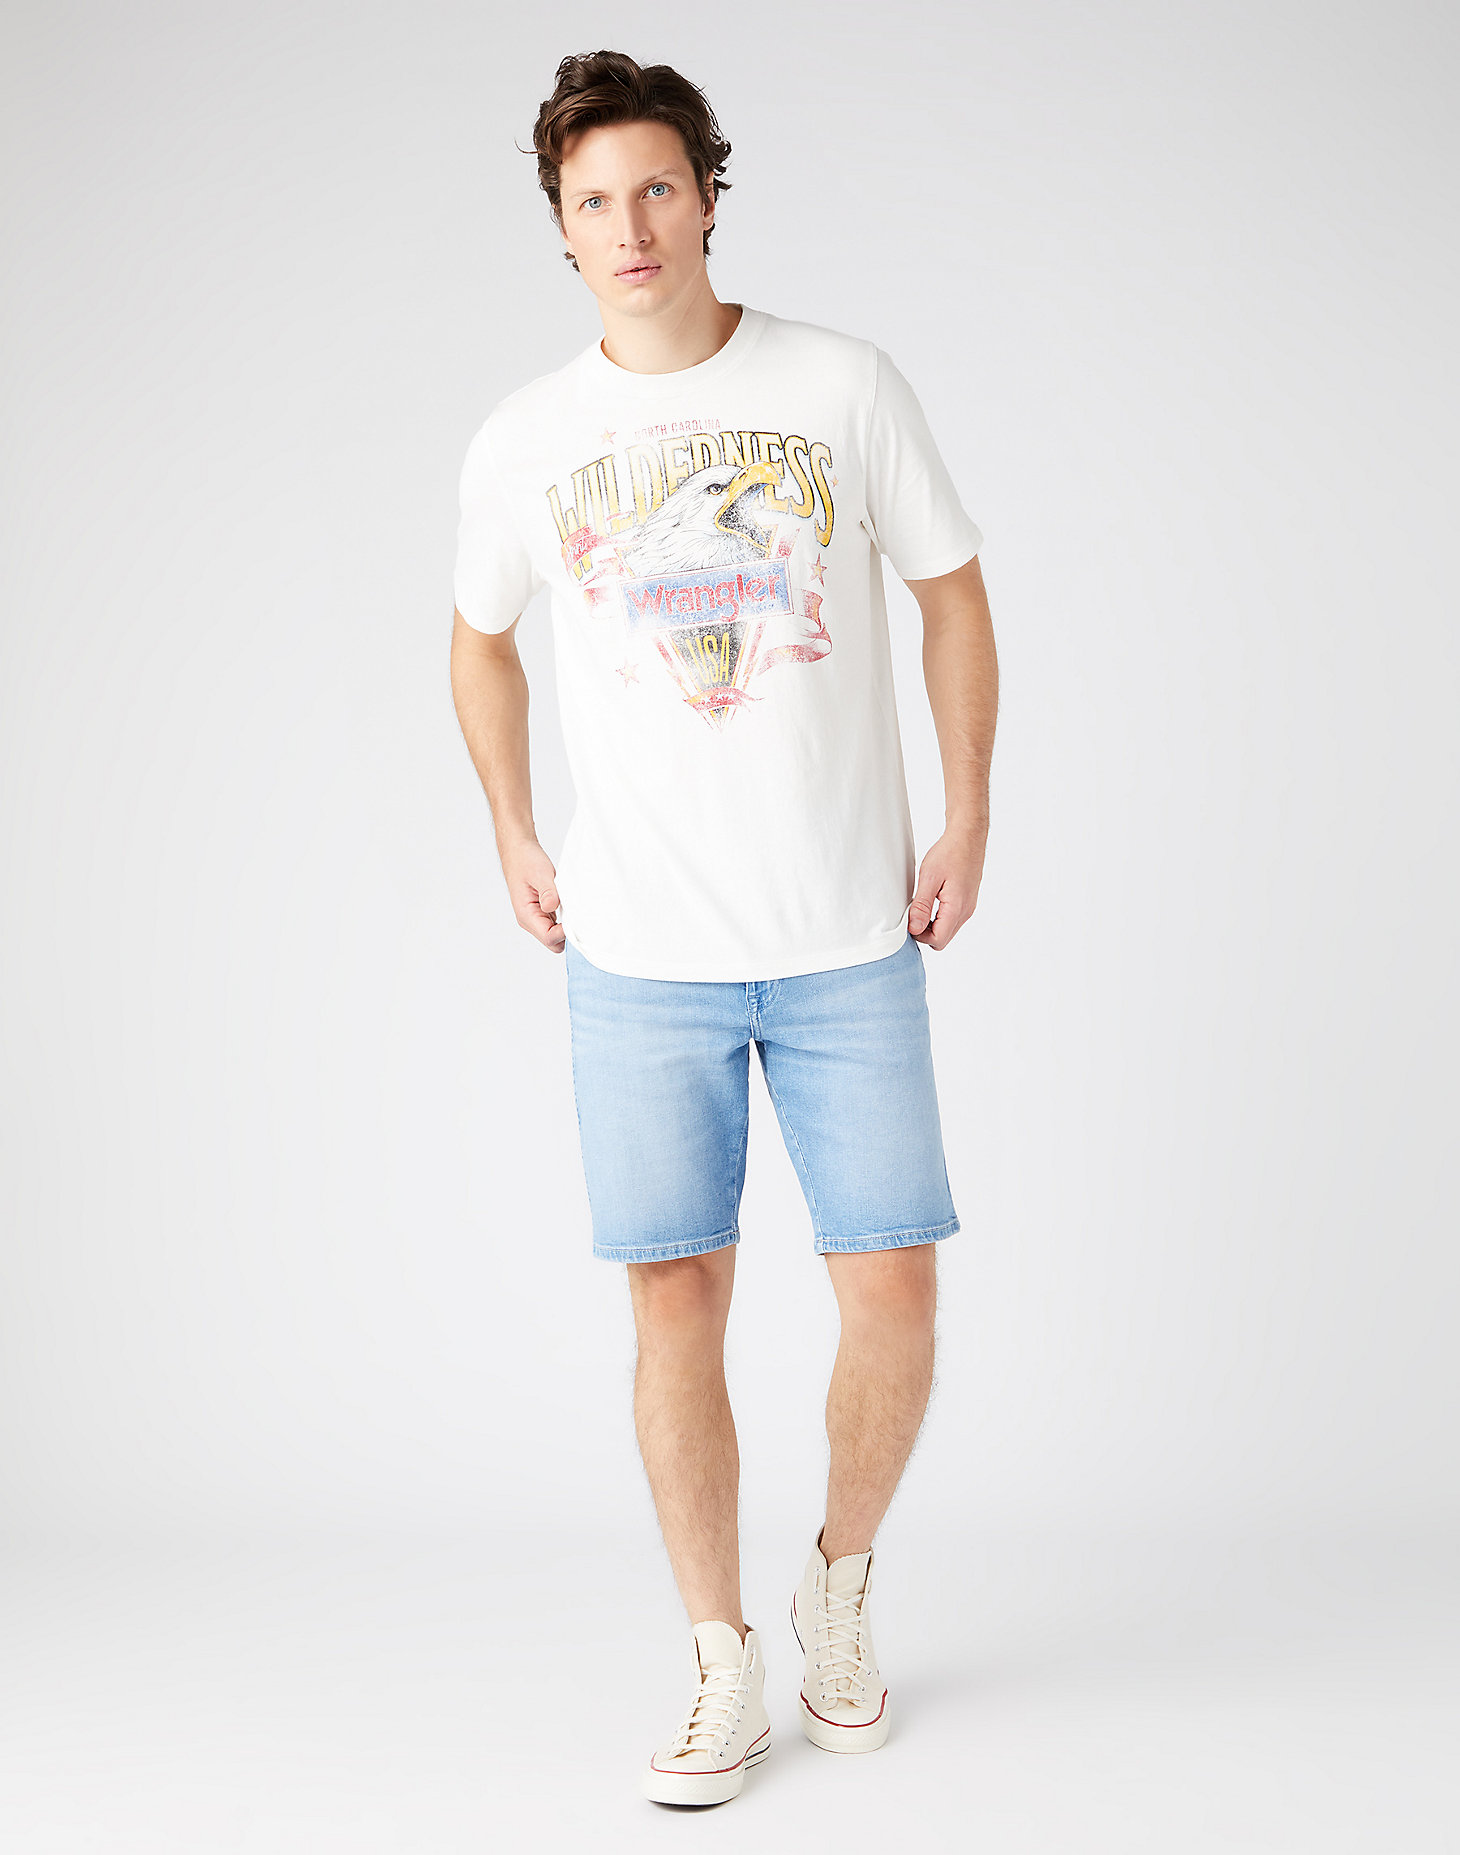 Eagle Tee in Off White alternative view 1